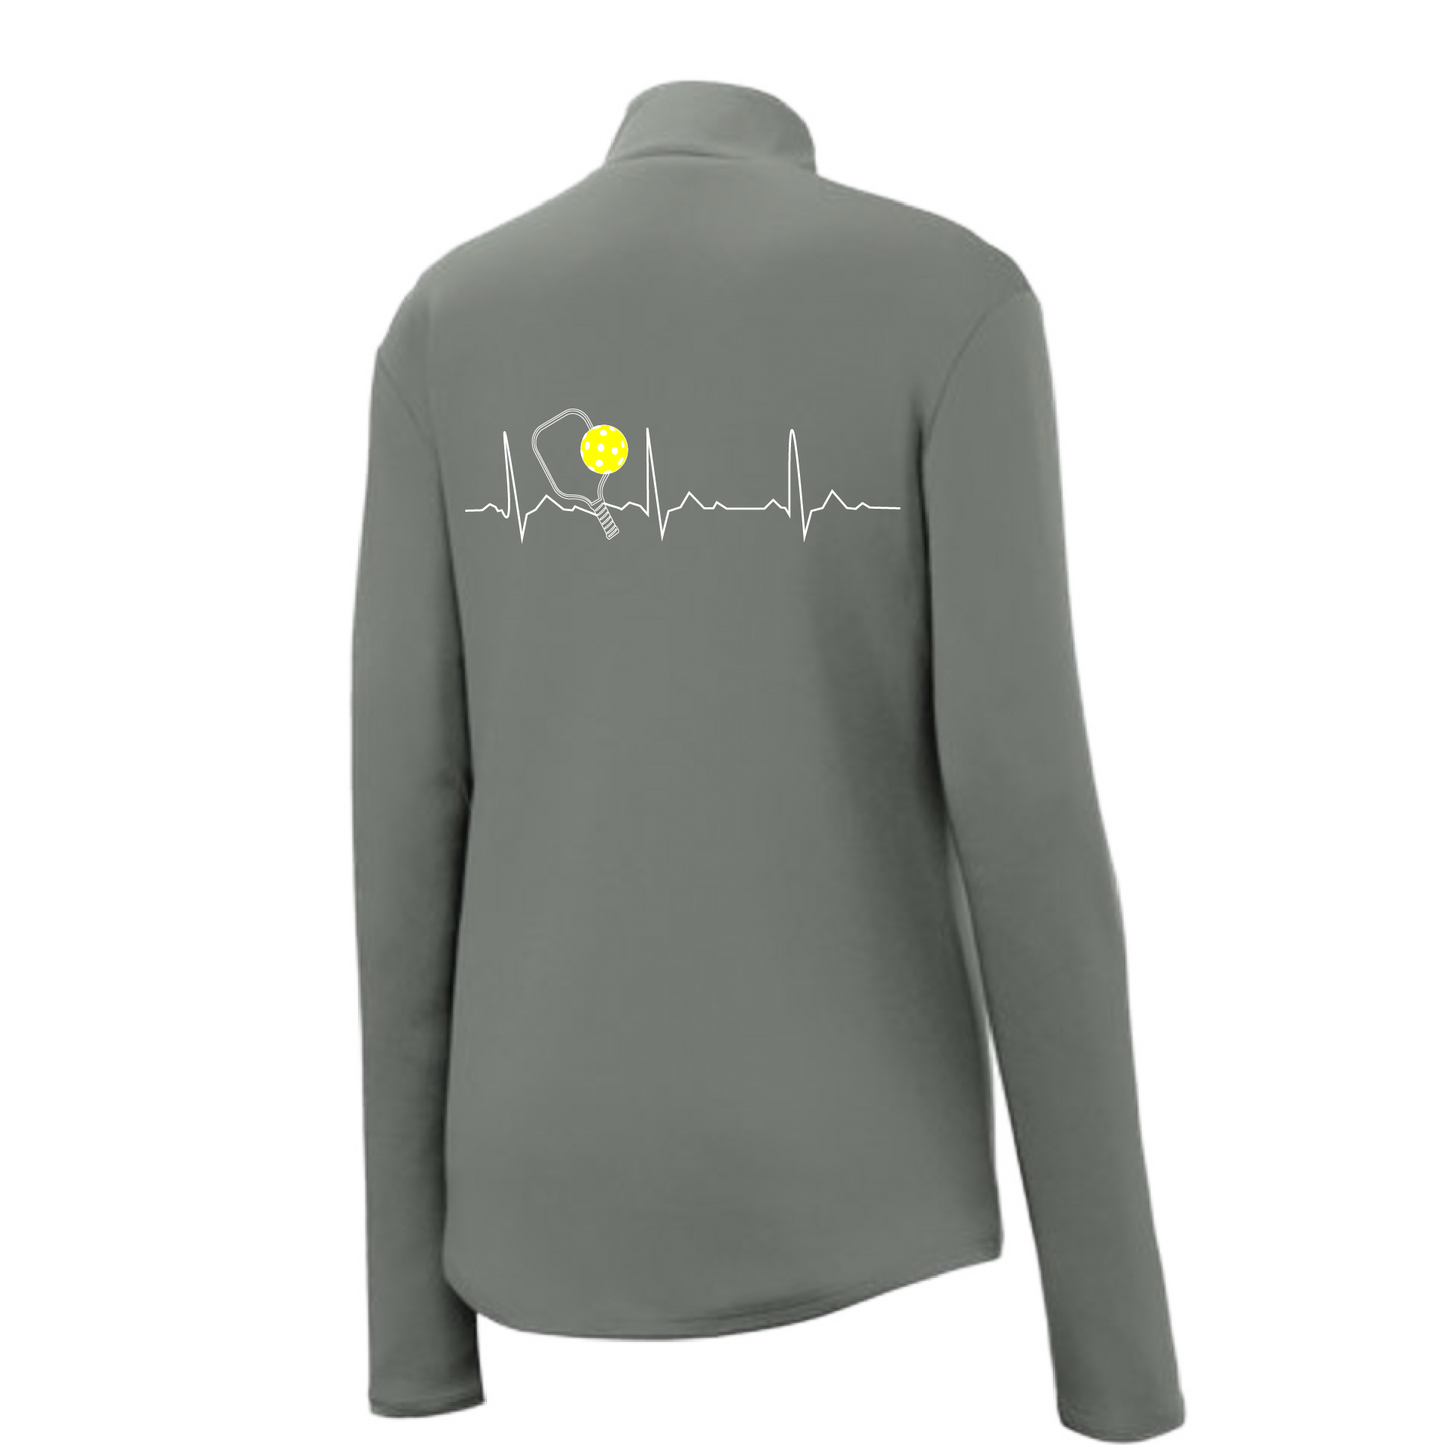 Pickleball Design: Heartbeat Customizable Location  Women's 1/4-Zip Pullover: Princess seams and drop tail hem.  Turn up the volume in this Women's shirt with its perfect mix of softness and attitude. Material is ultra-comfortable with moisture wicking properties and tri-blend softness. PosiCharge technology locks in color. Highly breathable and lightweight. Versatile enough for wearing year-round.